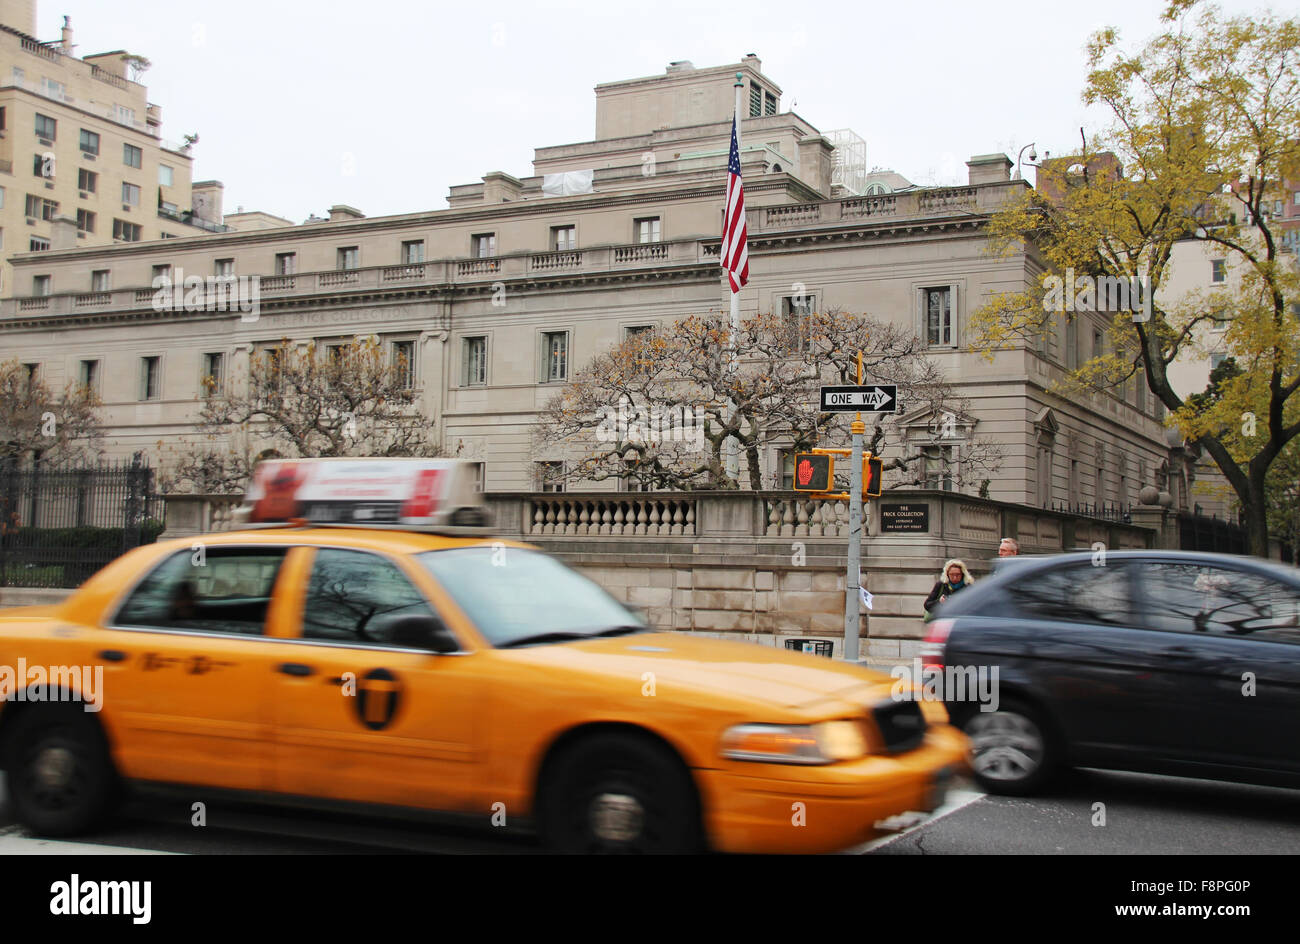 New York, USA. 9th Dec, 2015. The Frick Collection in New York, USA, 9 December 2015. The museum for art from the Renaissance to the 19th century is turning 80 years old. PHOTO: CHRISTINA HORSTEN/DPA - NO WIRE SERVICE - © dpa/Alamy Live News Stock Photo